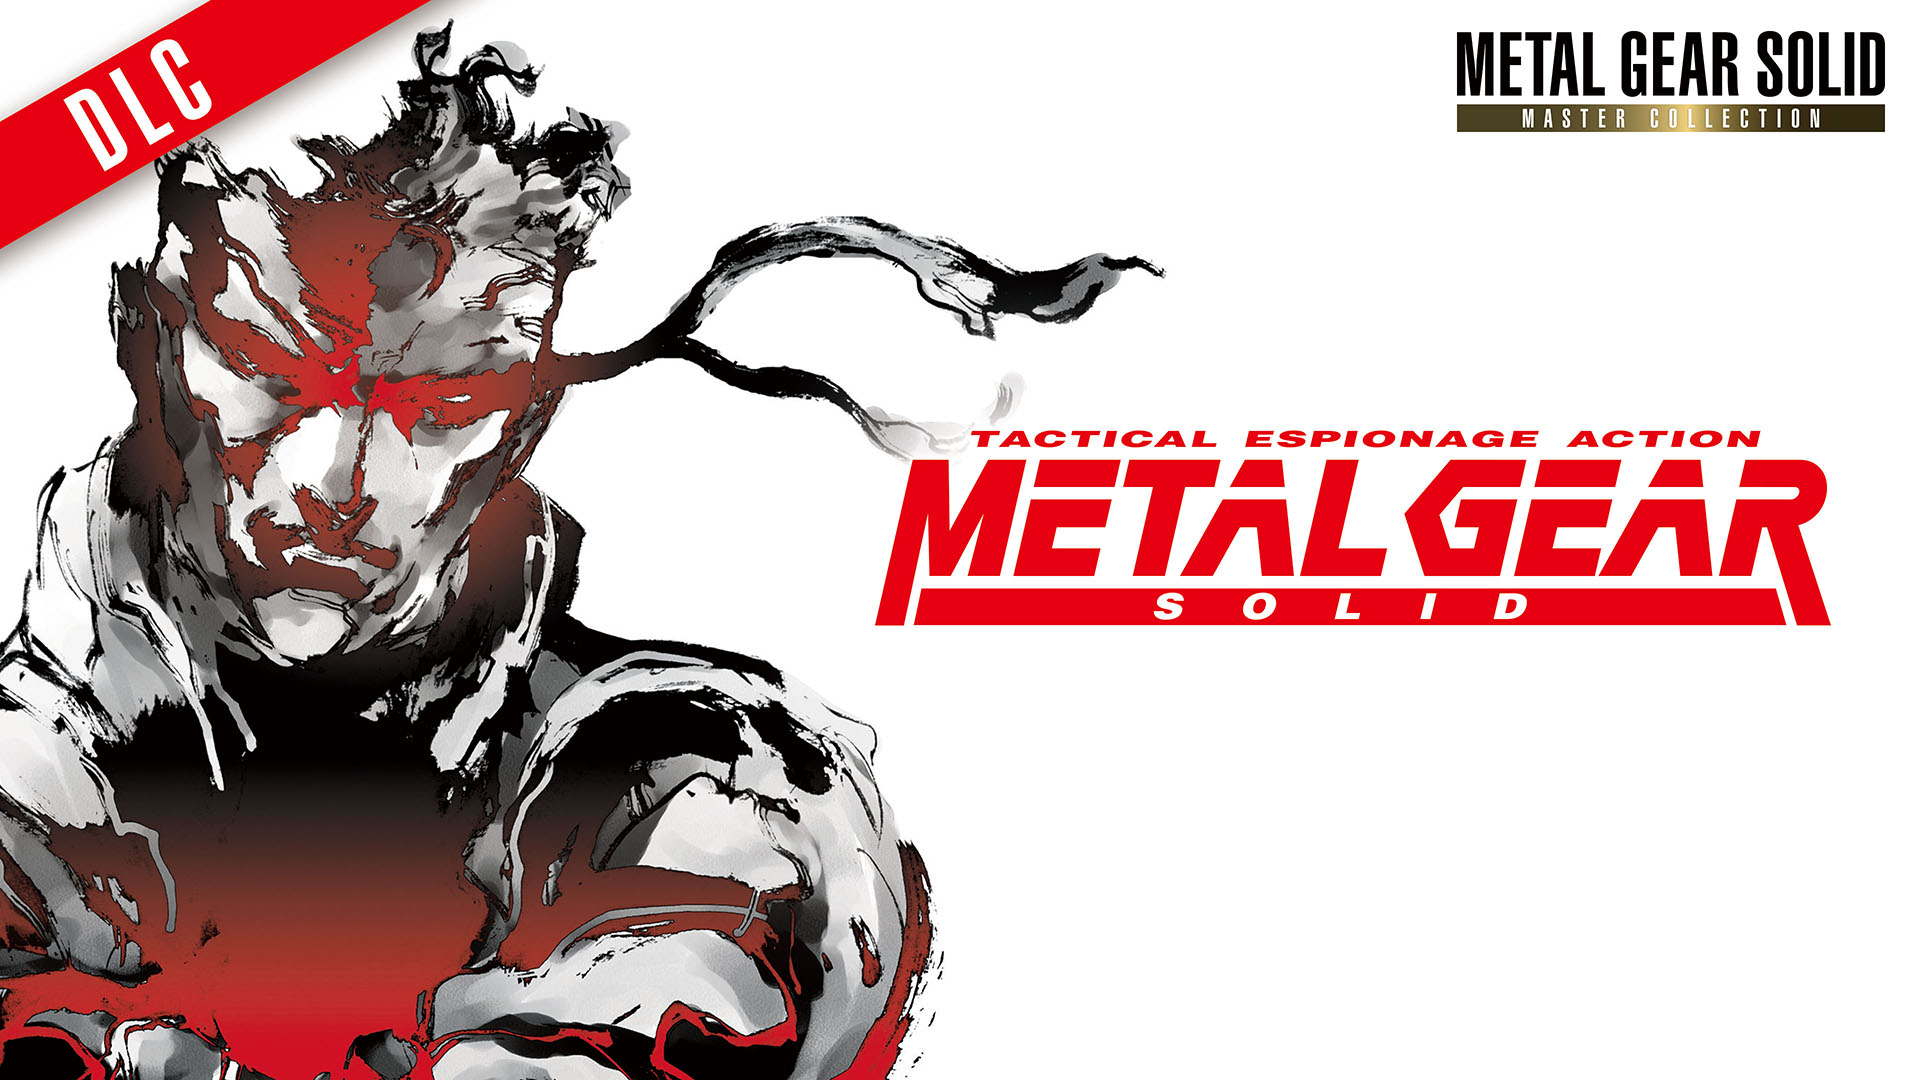 METAL GEAR SOLID - Master Collection Version European Pack